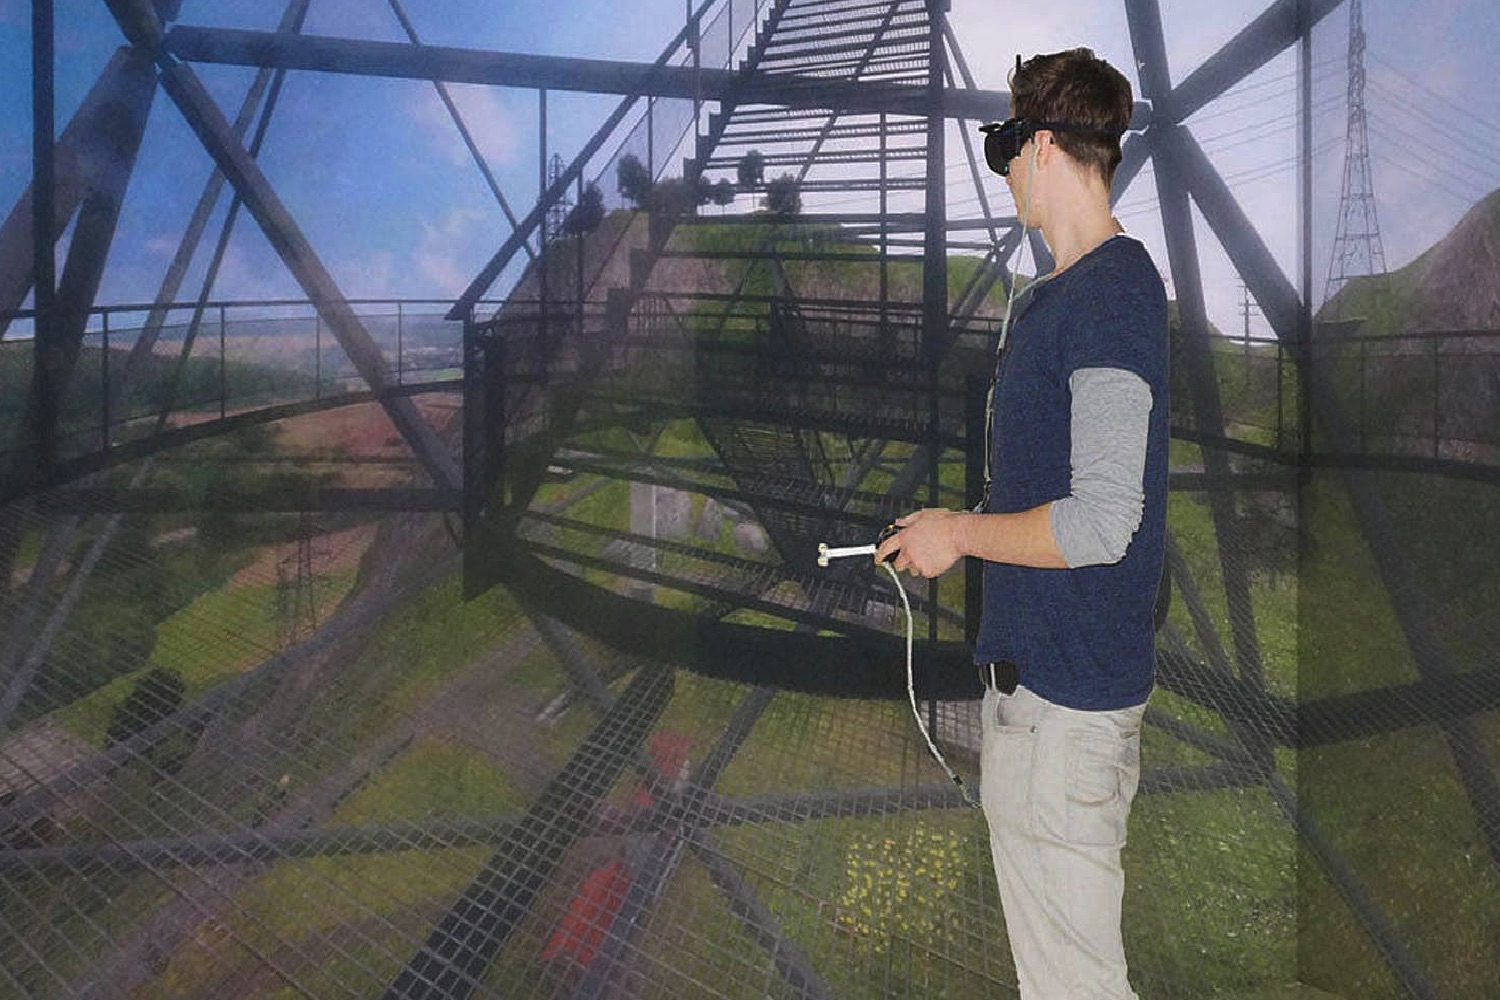 vr magnets fear of heights unlearn 1